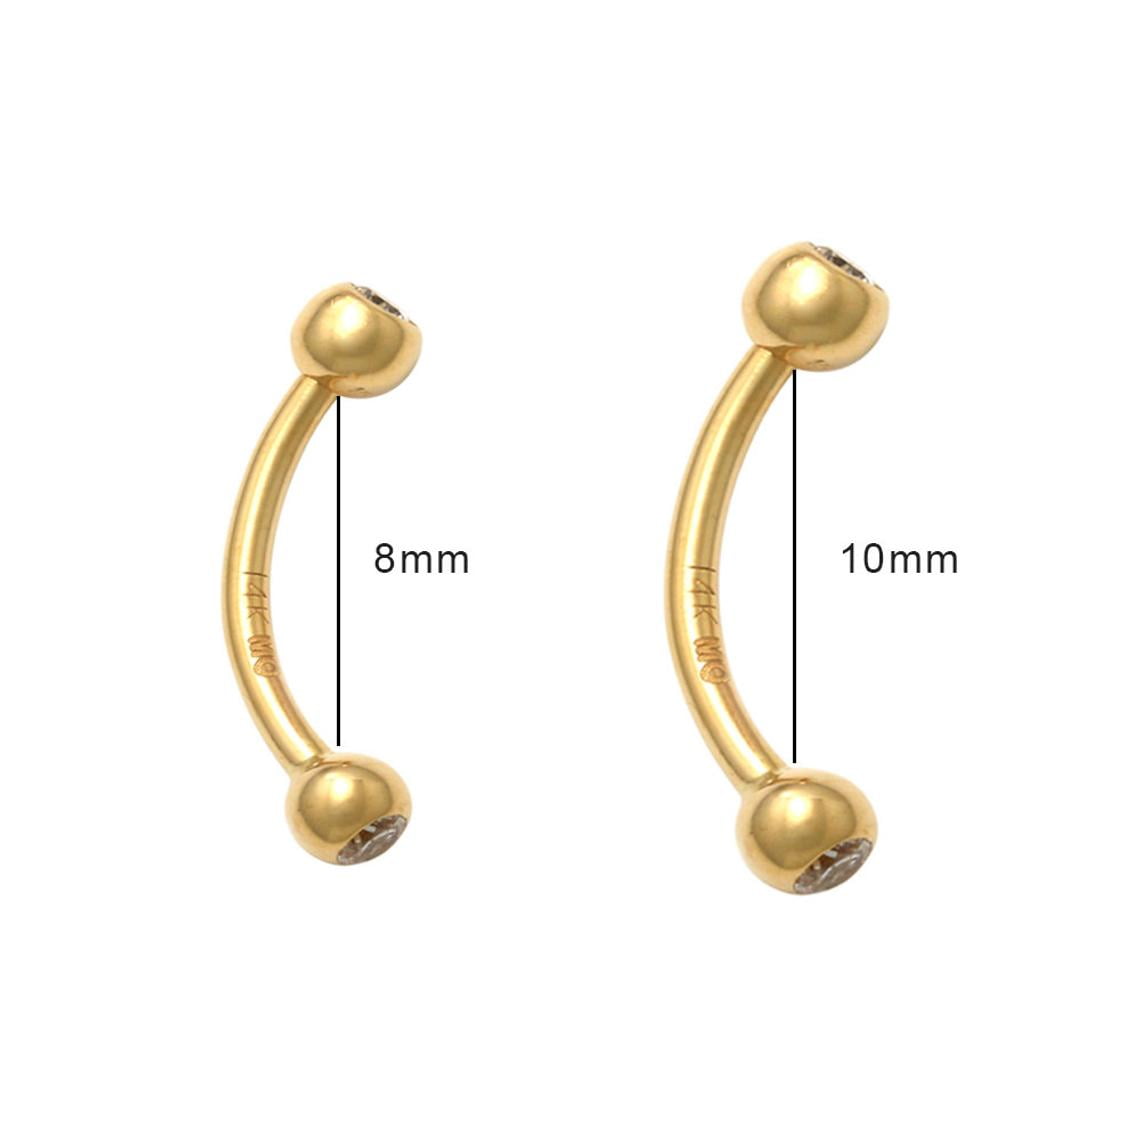 Anygolds 14K Real Solid Gold 2mm CZ Ball Bent Barbell eyebrow Piercings  Rook Earrings Daith Piercings Lip Belly Button Rings Forward Helix Tragus  